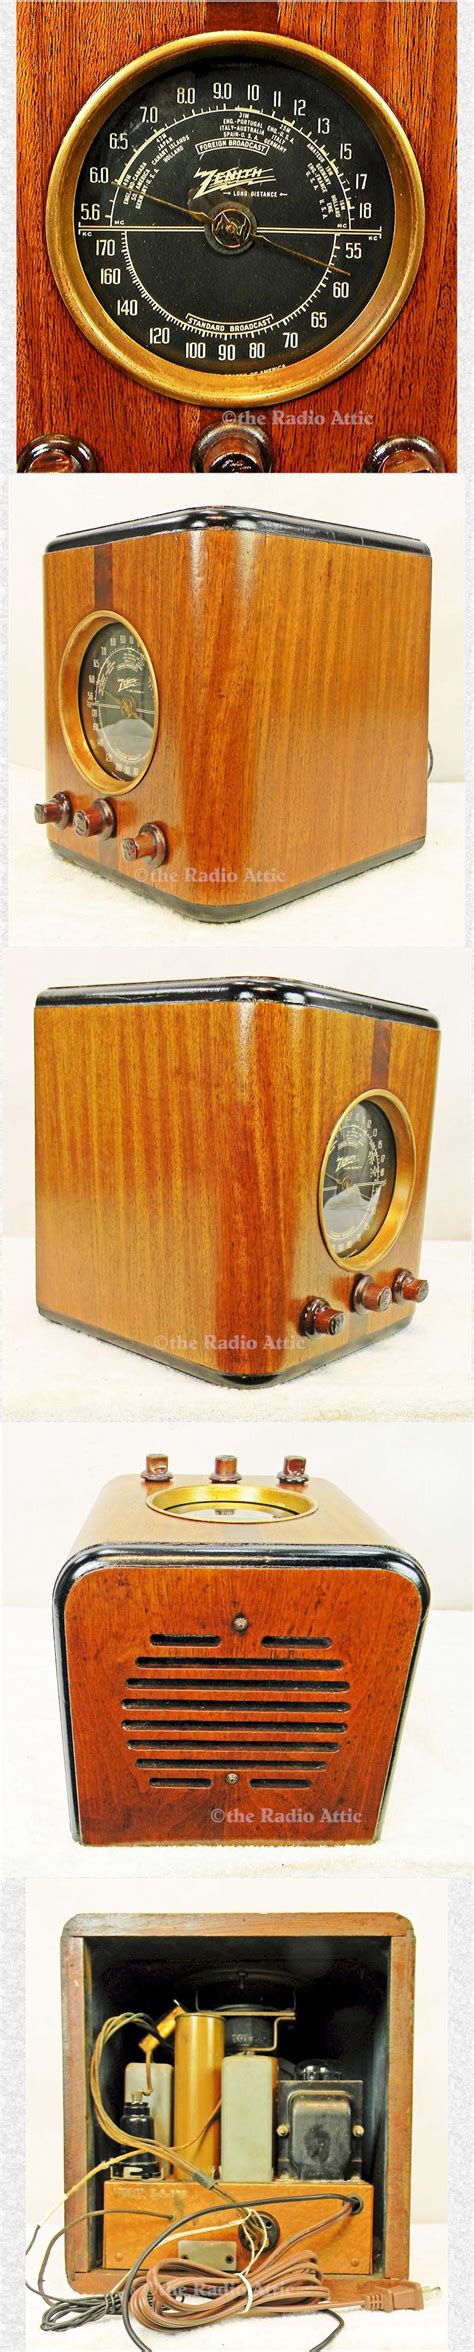 Zenith 5 S 220 Cube 1938 Sold Item Number 0961478